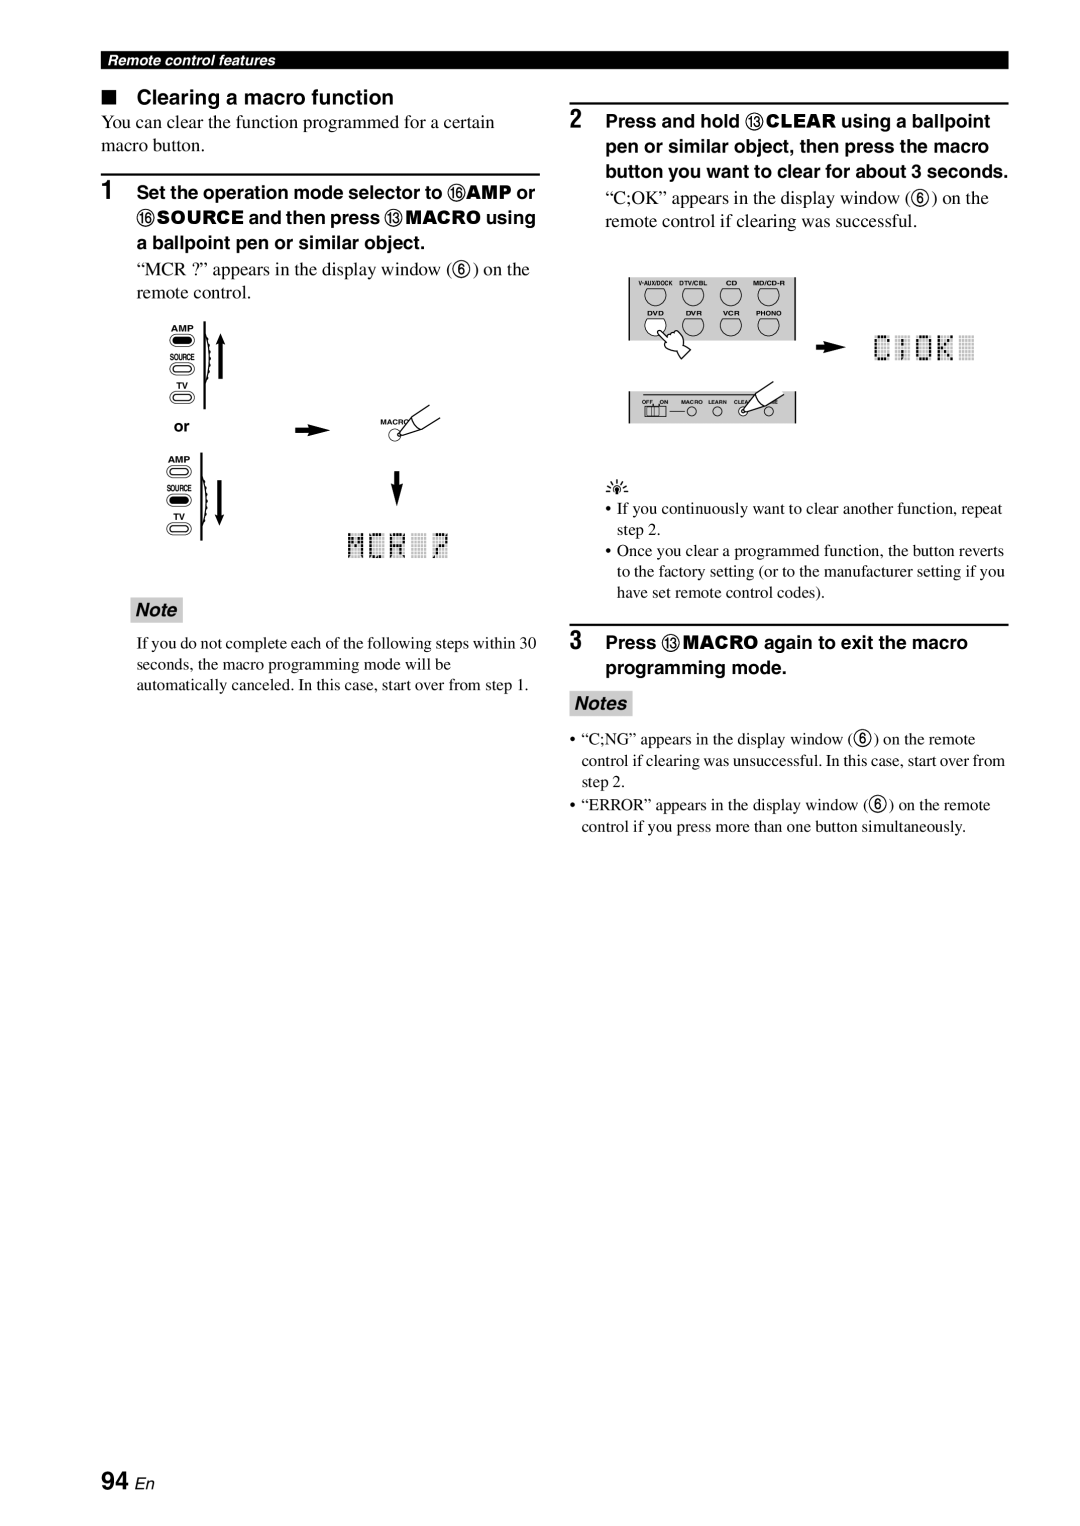 Yamaha DSP-AX863SE owner manual 94 En, Clearing a macro function, a ballpoint pen or similar object, Notes 